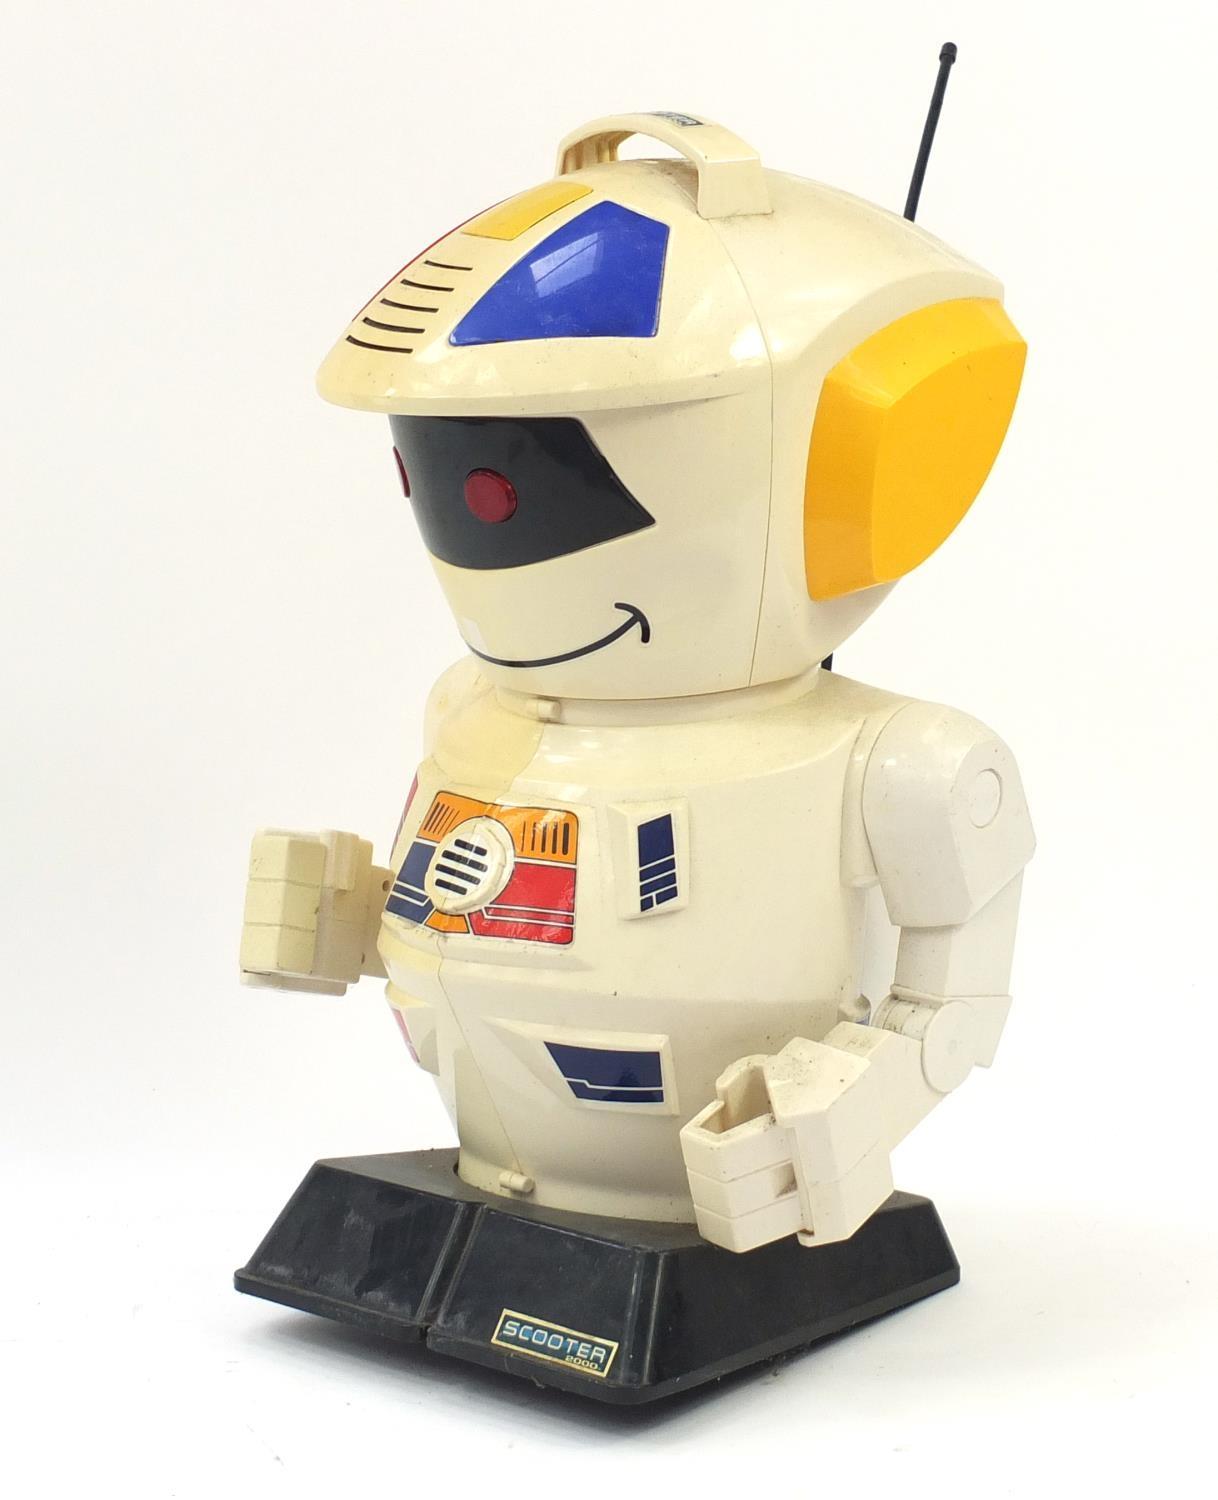 Large retro scooter 2000 remote control robot, 66cm high : For Further Condition Reports Please